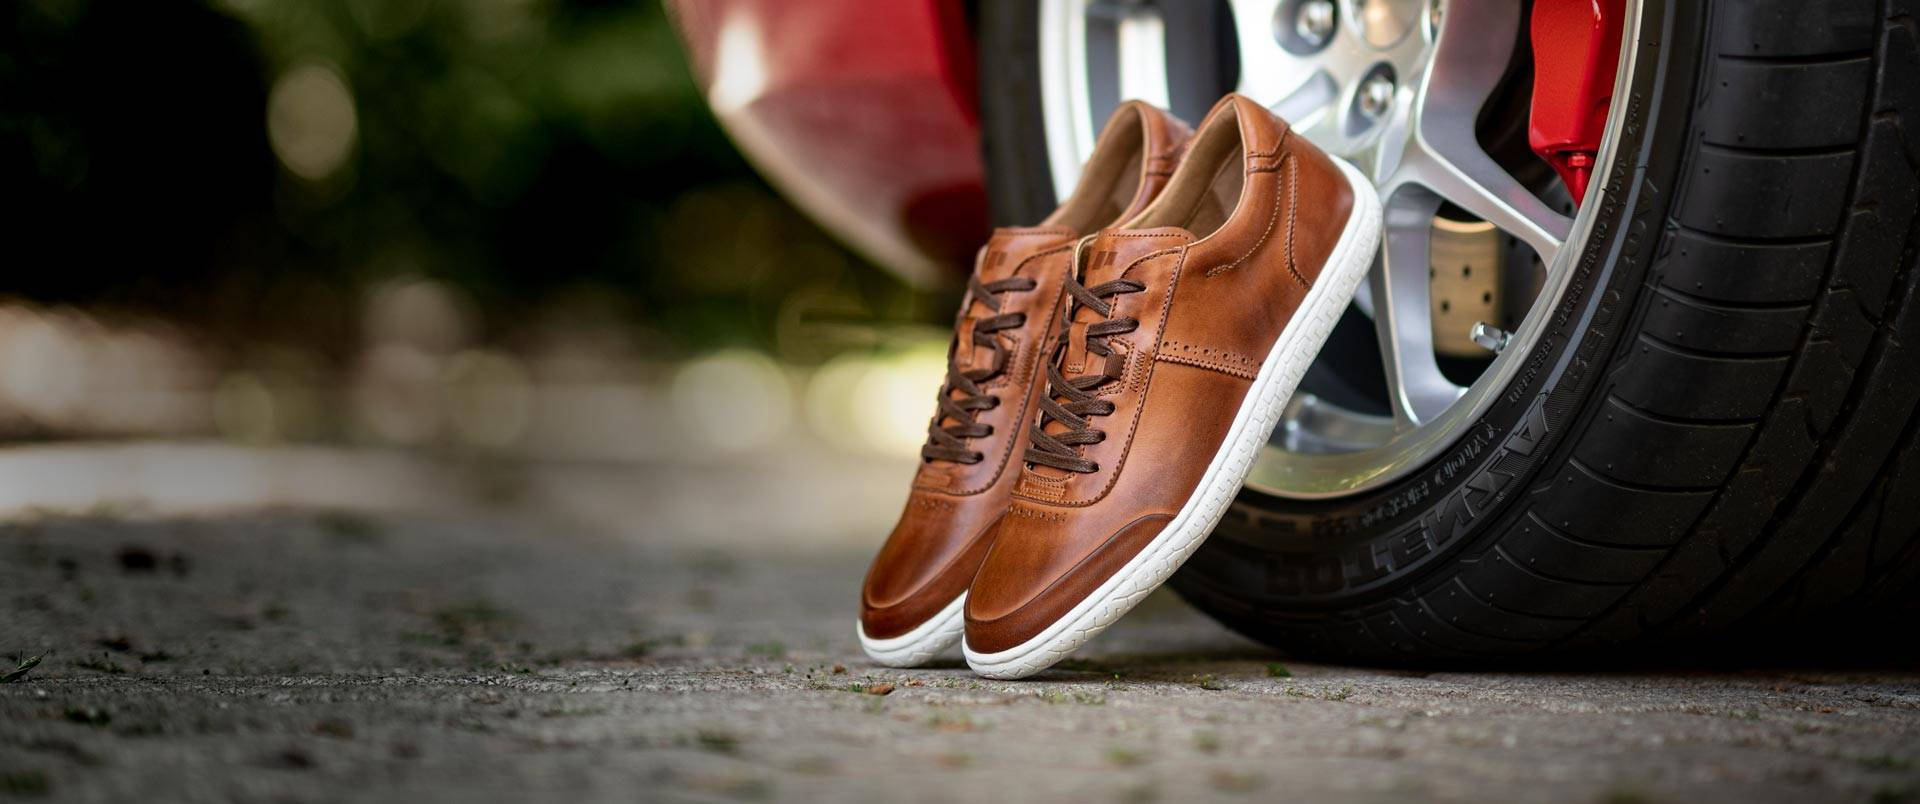 Driving Shoes, Racing Shoes and Apparel For Sale Online | Piloti